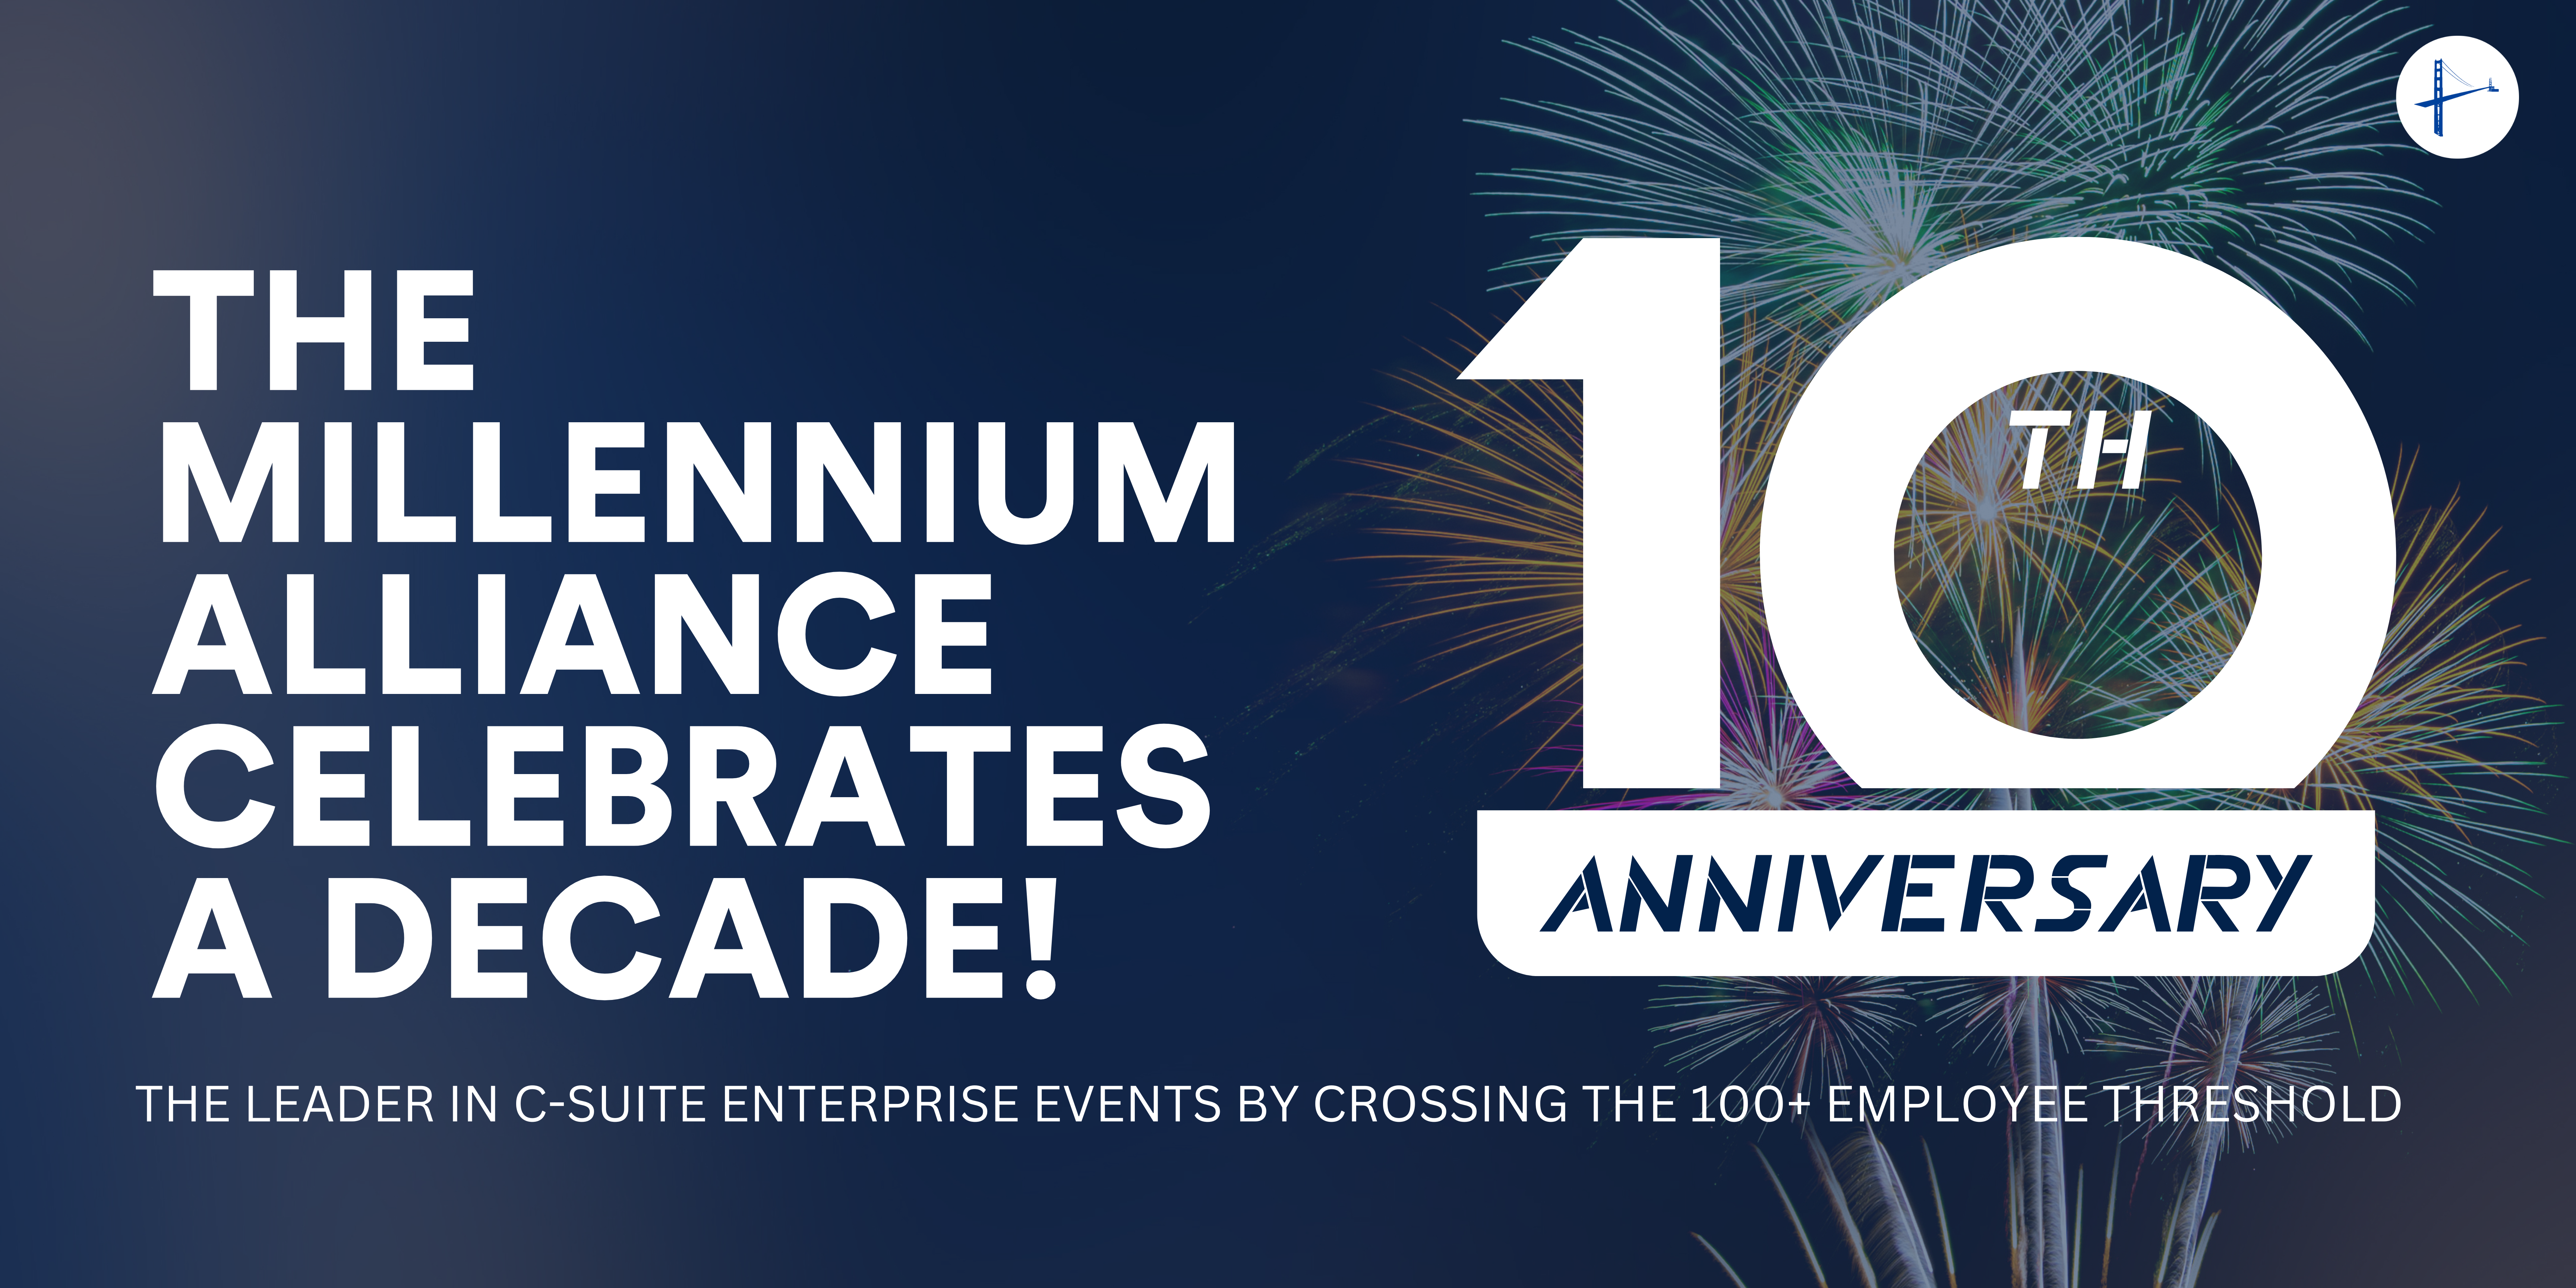 The Millennium Alliance Celebrates A Decade Of Being The Leader In C-Suite Enterprise Events By Crossing The 100+ Employee Threshold